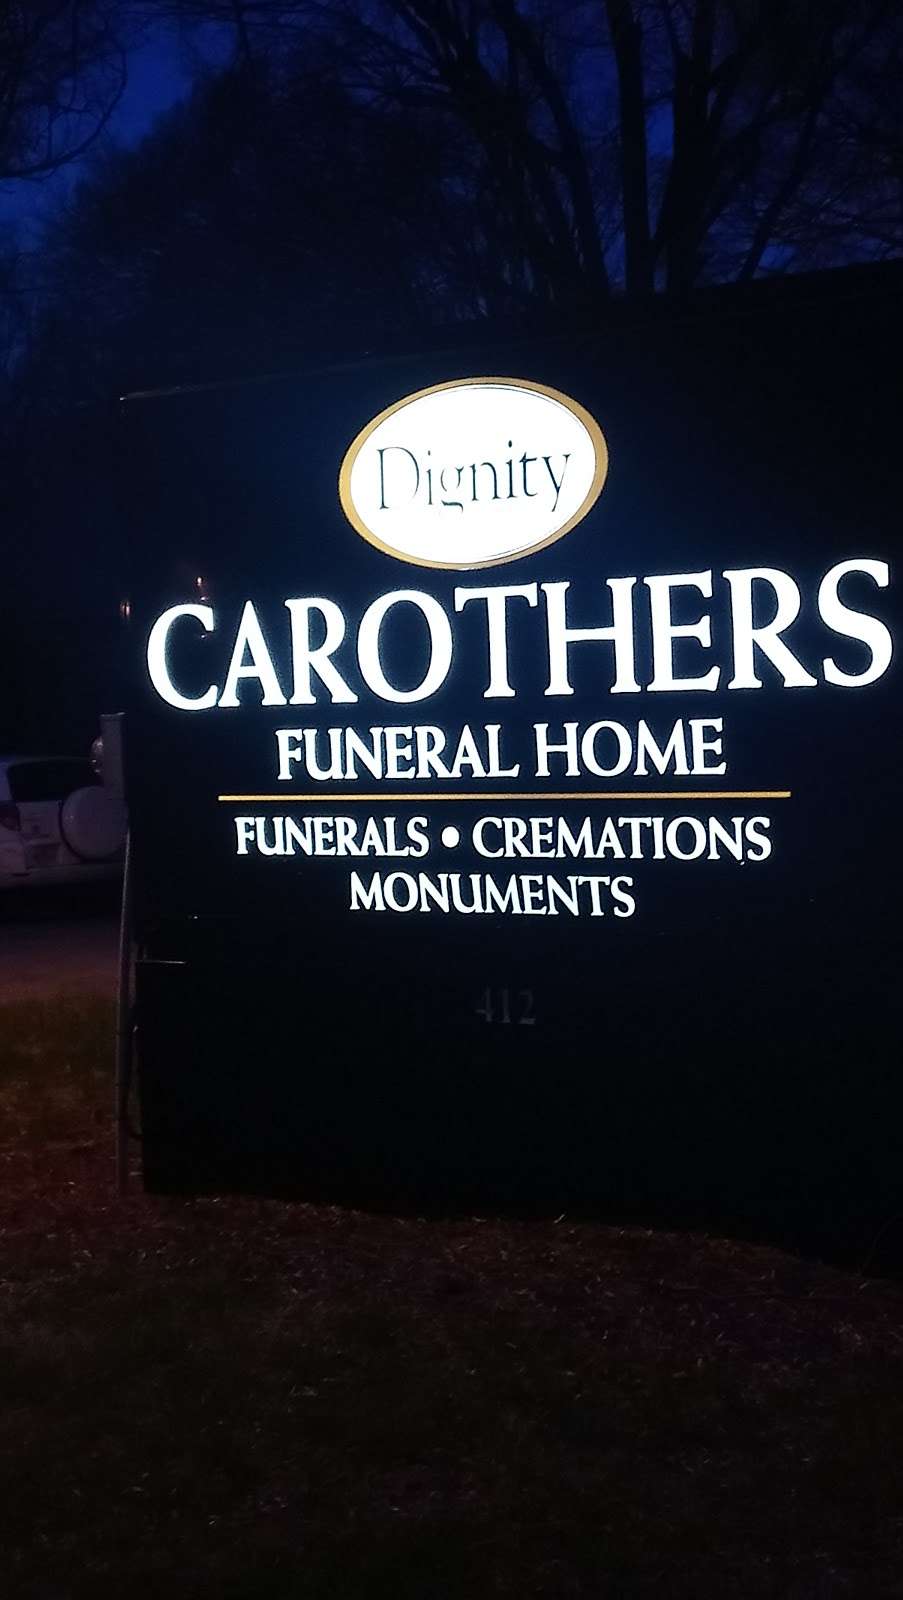 Carothers Funeral Home | 412 S Main St, Stanley, NC 28164 | Phone: (704) 263-2631